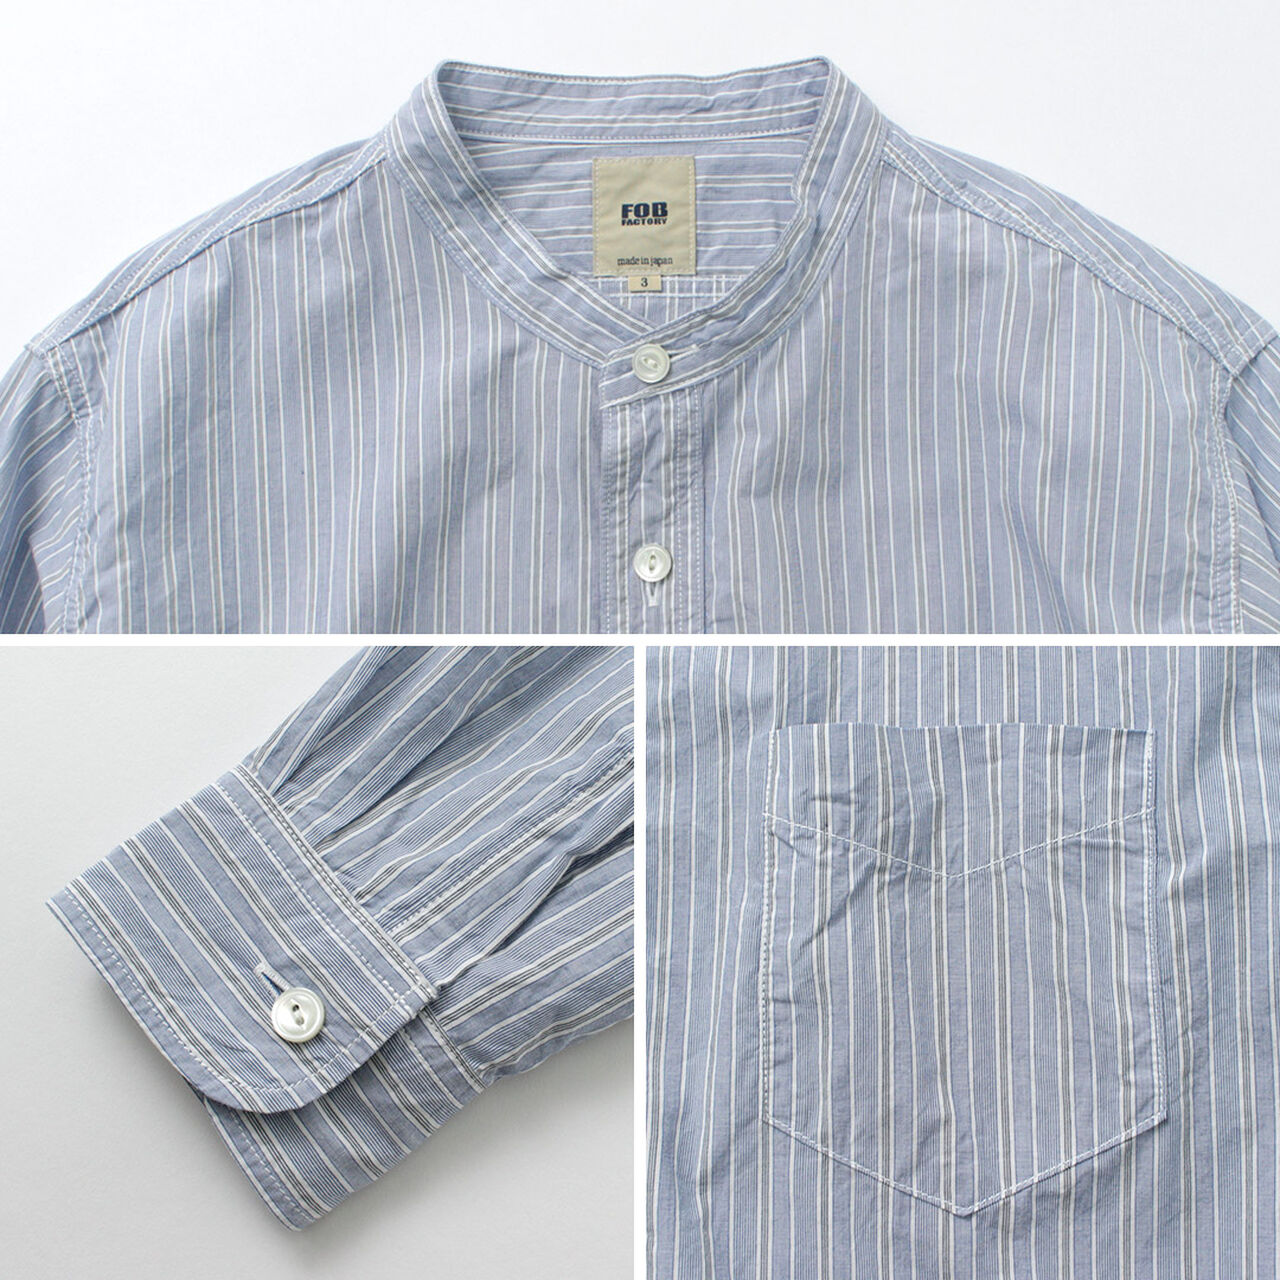 F3488 striped band collar shirt,, large image number 12